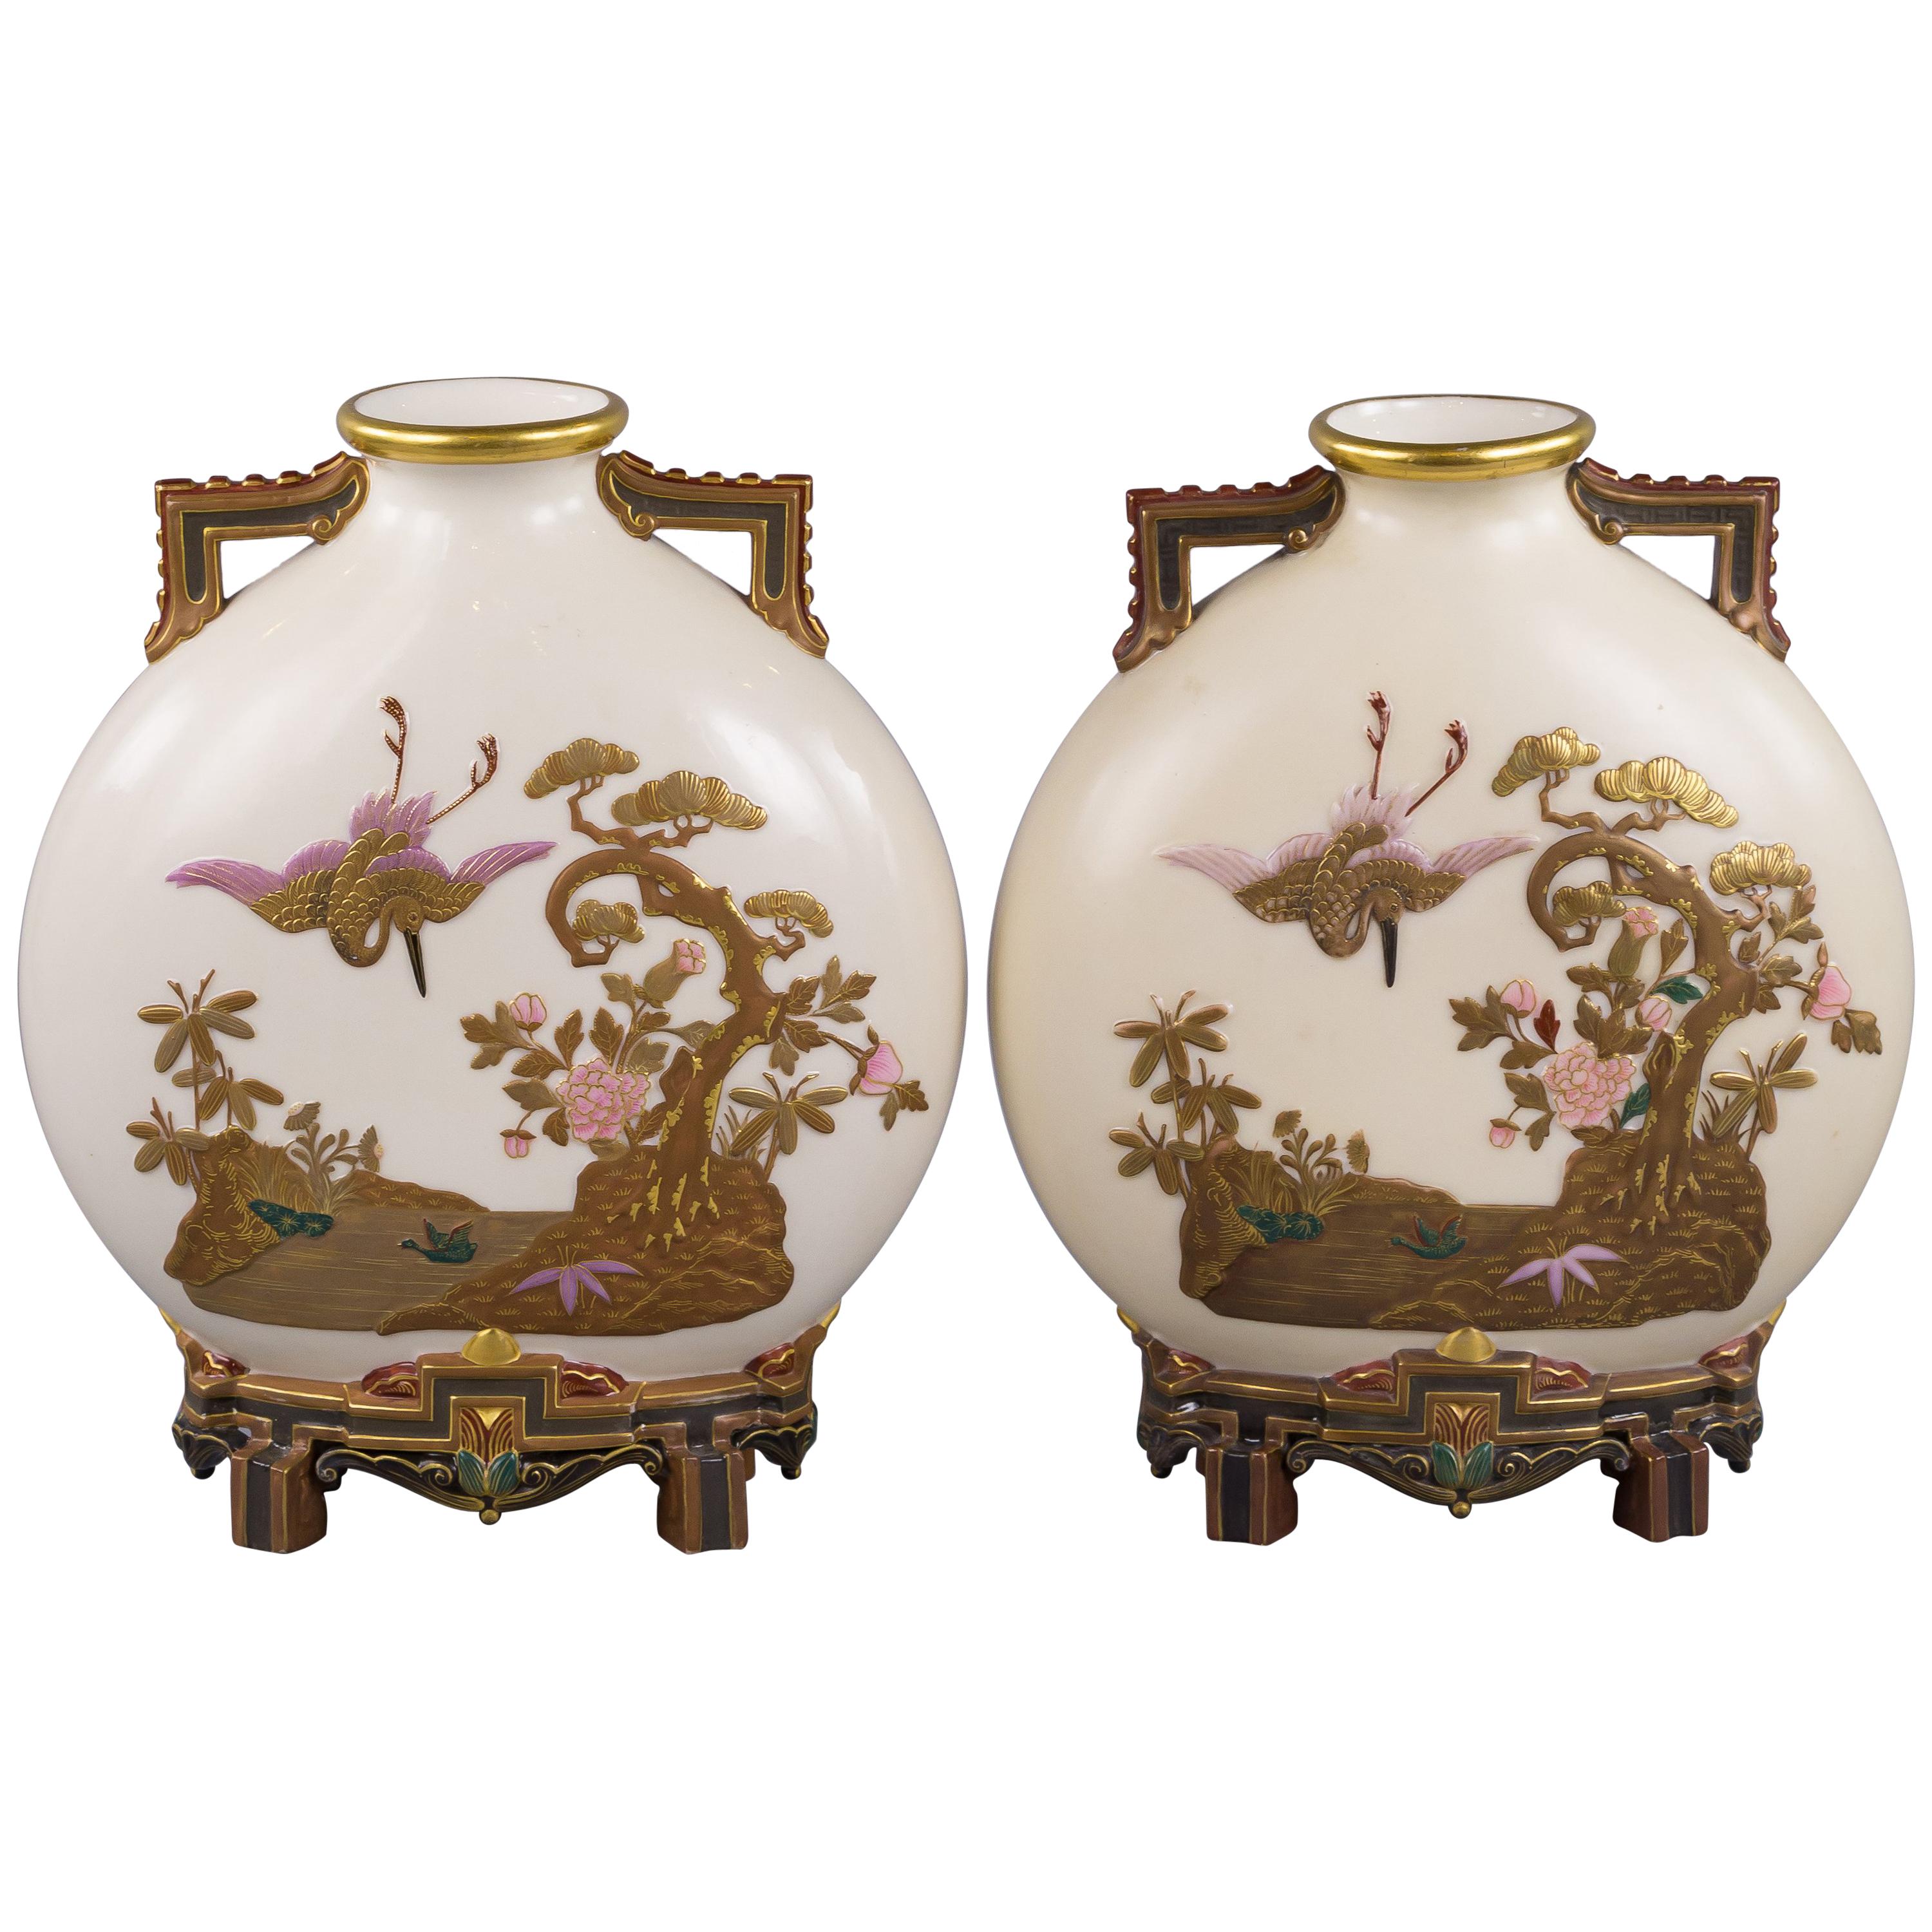 Pair of English Porcelain Moon Flask Vases, Royal Worcester, circa 1880